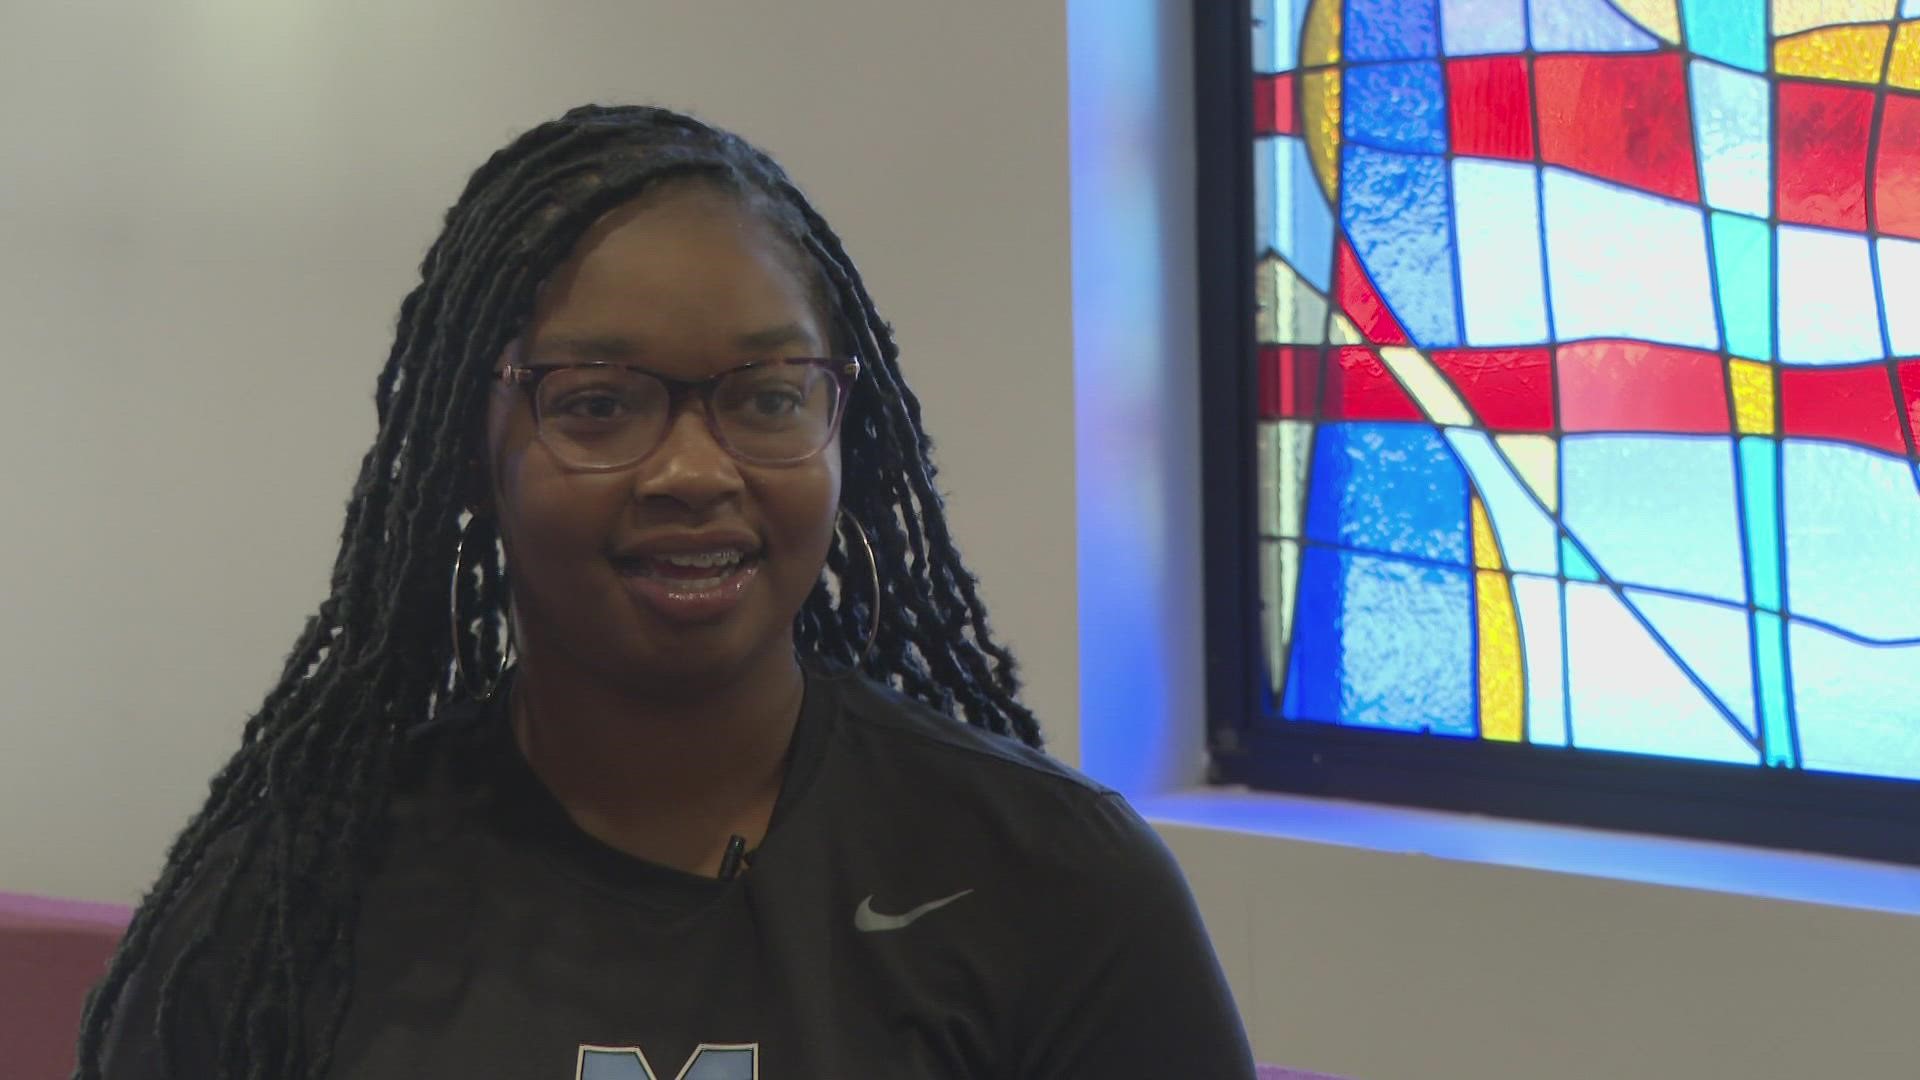 Destiny Morris shares her story of how she rose to the occasion during a chance opportunity to speak with Pope Francis.